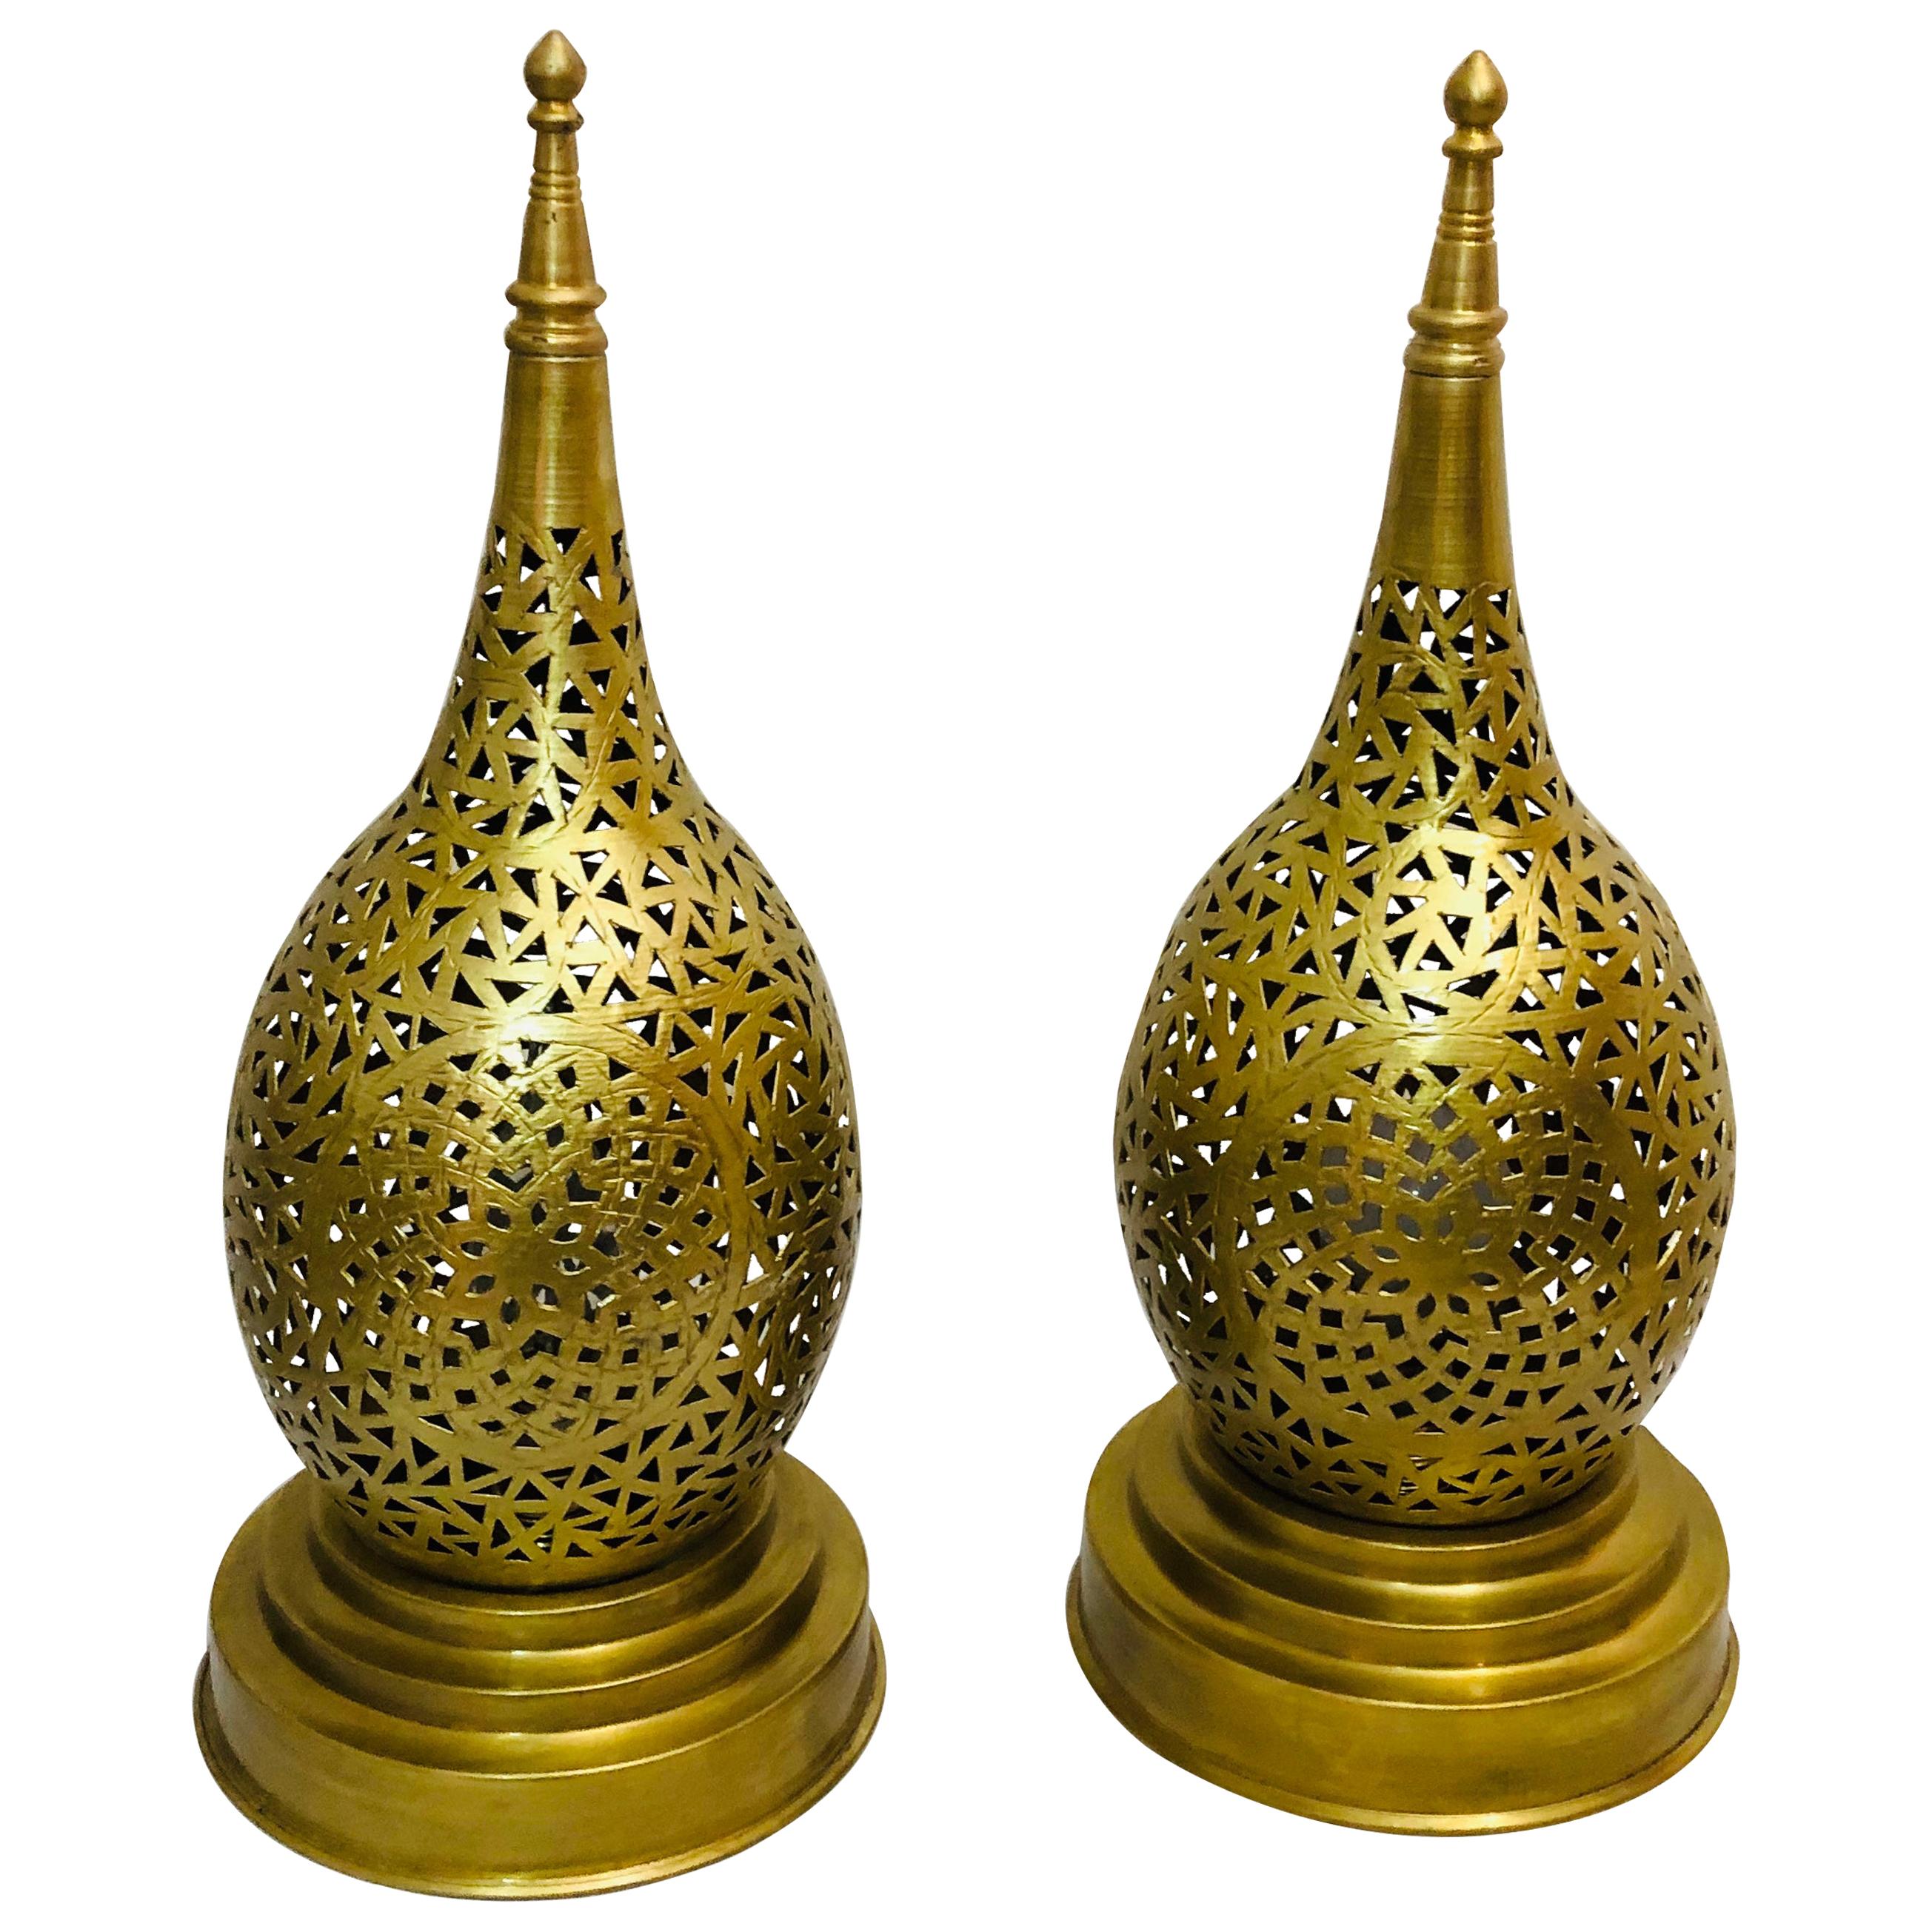 Tear Shaped Gold Brass Moroccan Table Lamps, a Pair